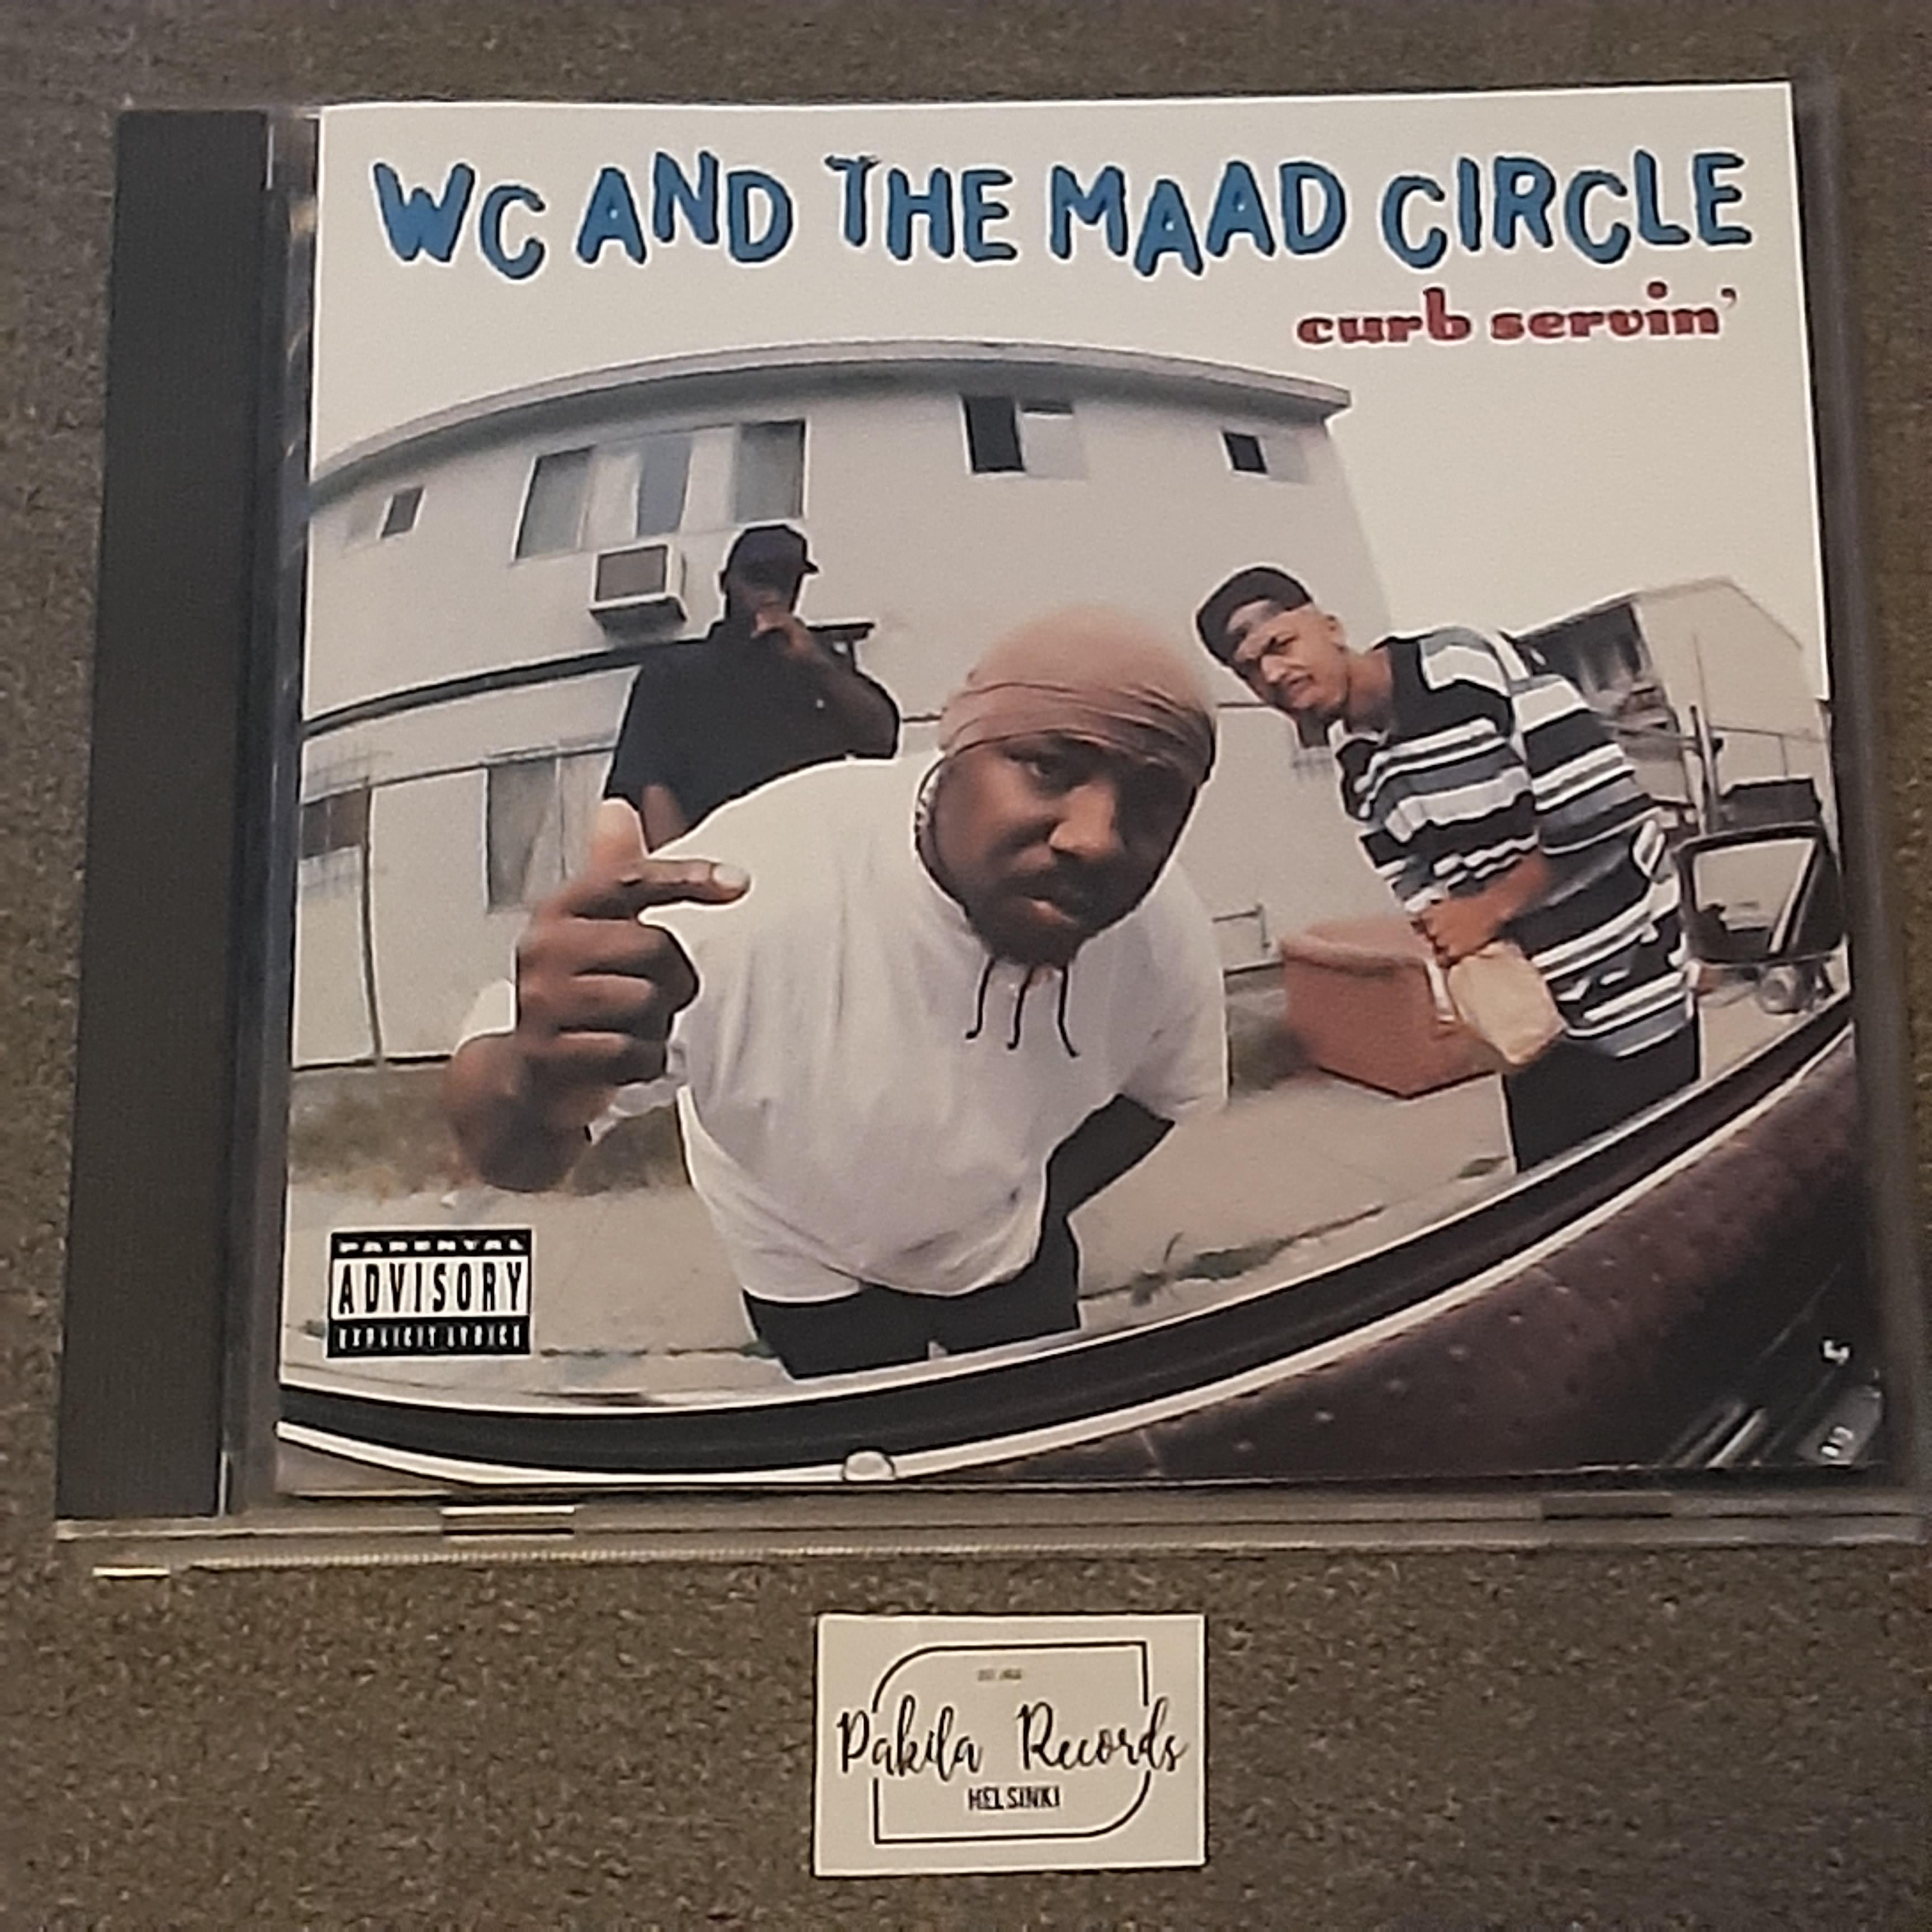 WC And The Maad Circle - Curb Servin' - CD (käytetty)